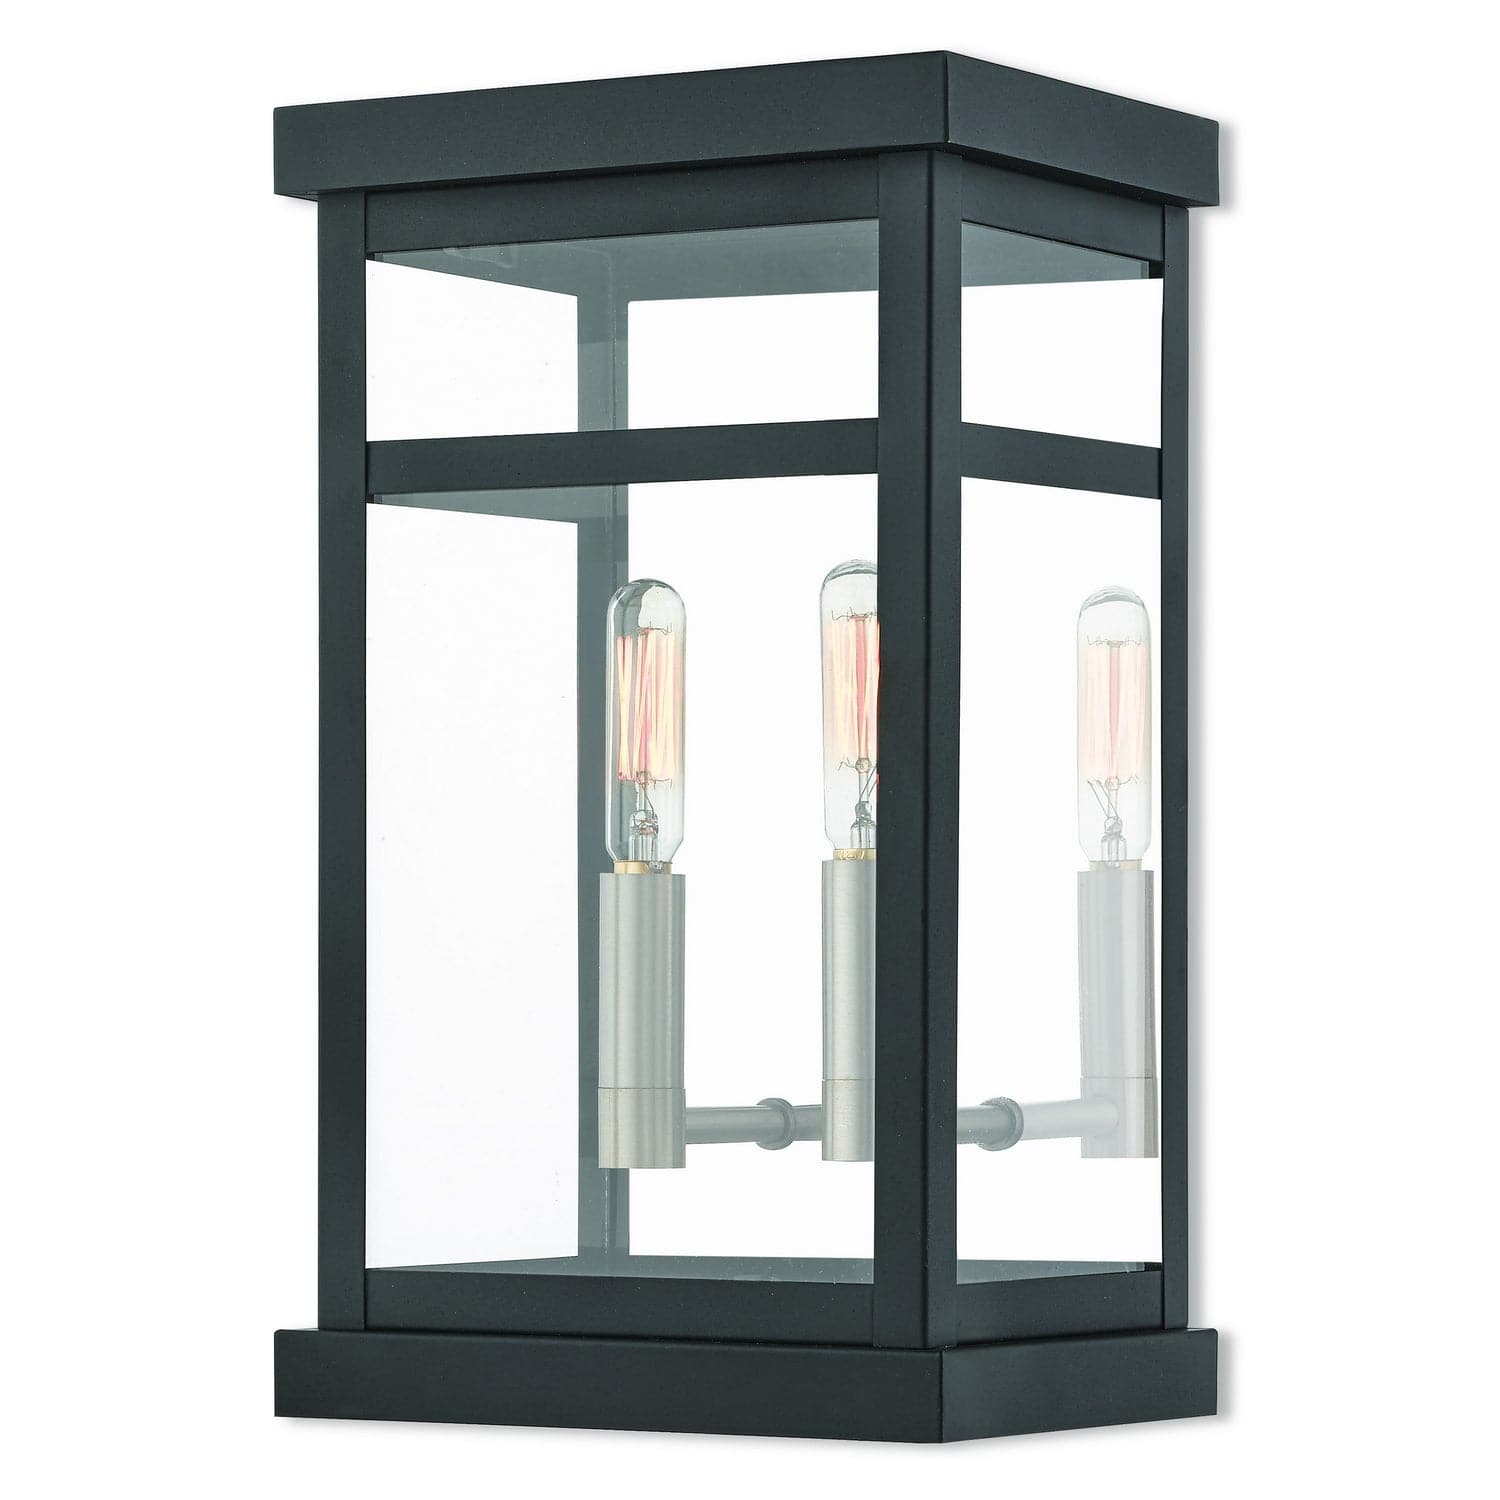 Livex Lighting - 20702-04 - Two Light Outdoor Wall Lantern - Hopewell - Black w/ Brushed Nickel Cluster and Polished Chrome Stainless Steel